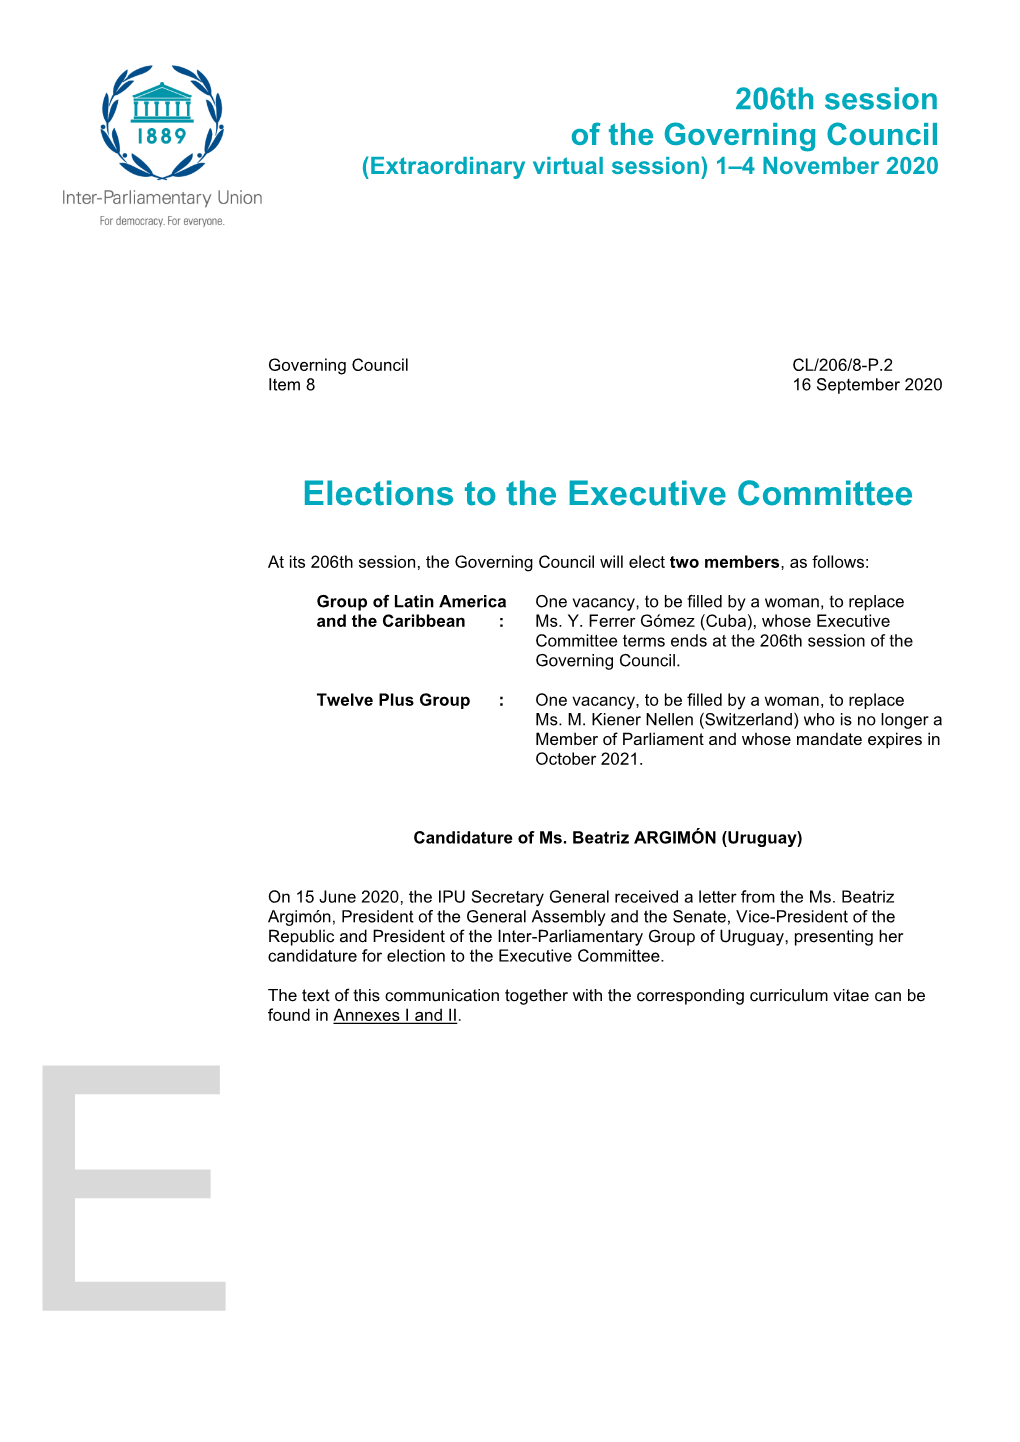 Elections to the Executive Committee